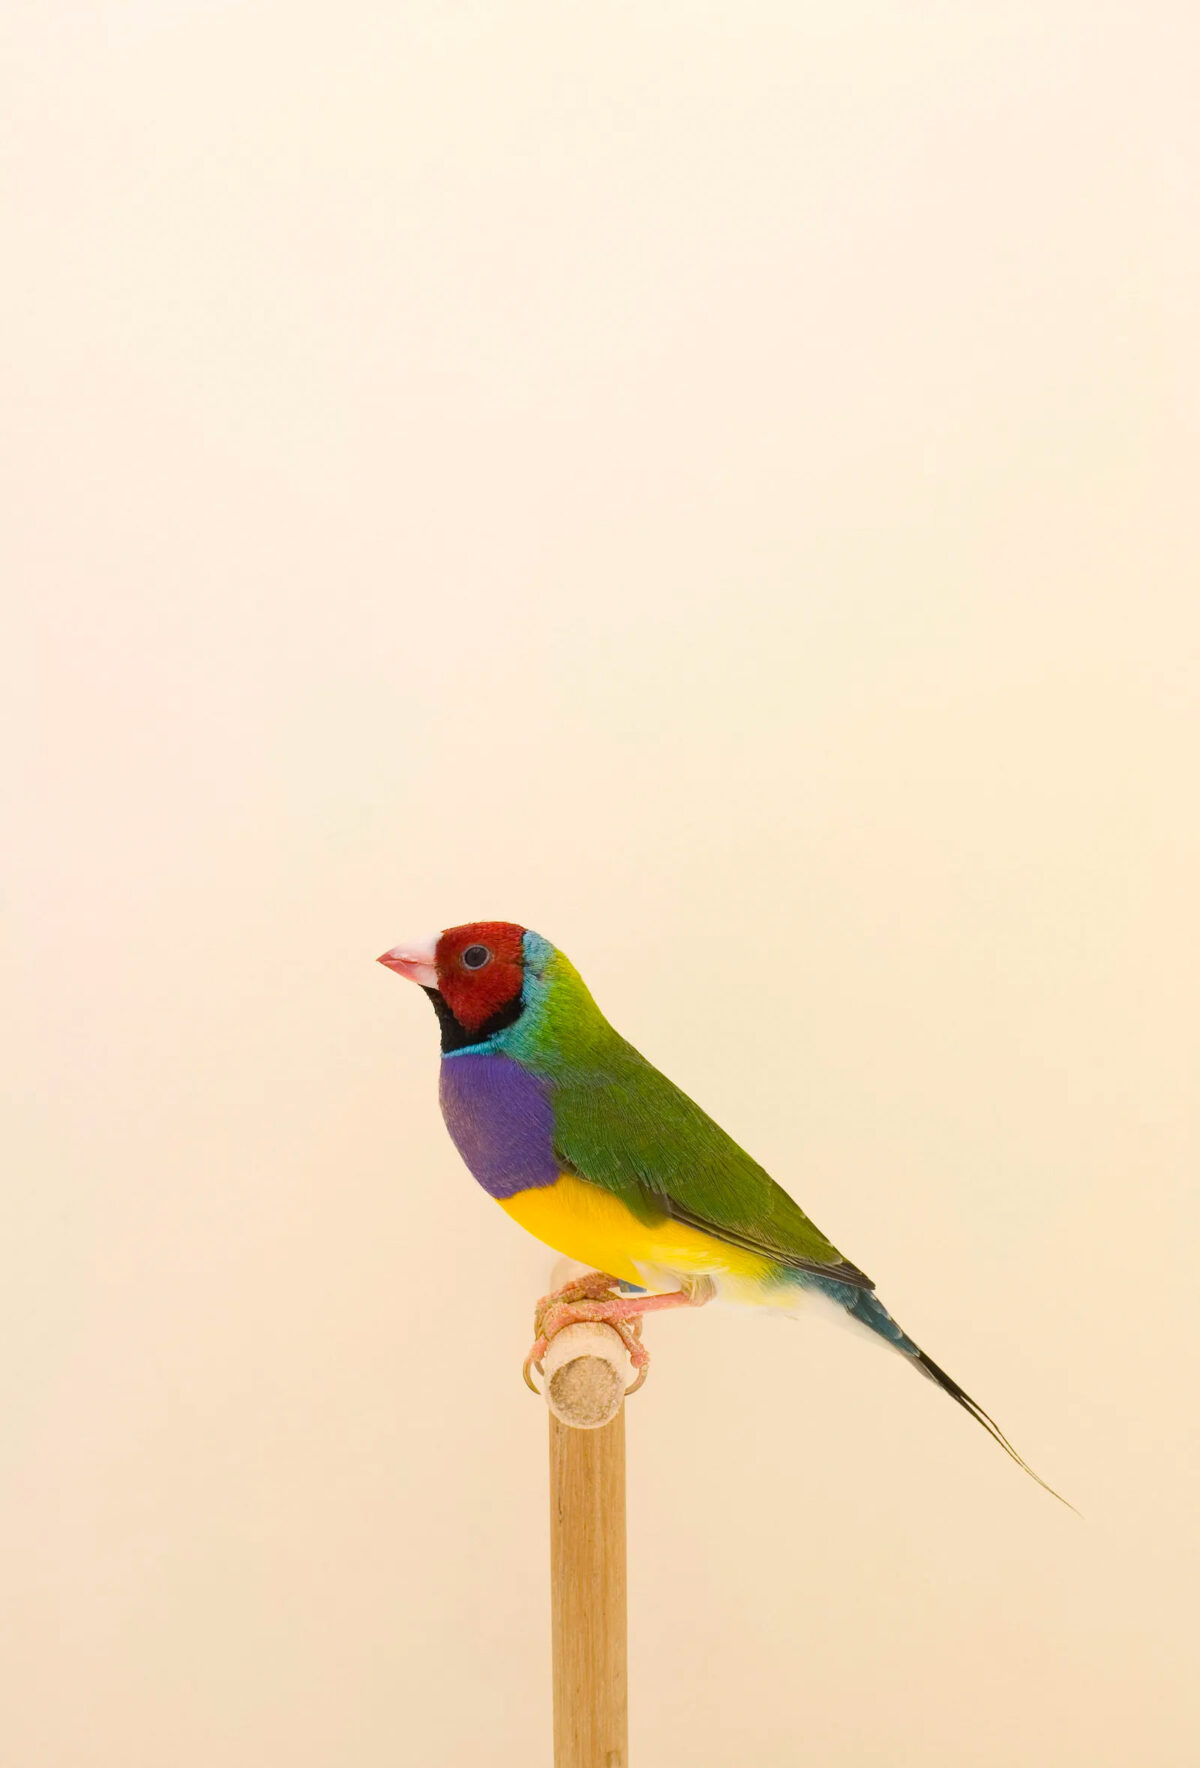 An Incomplete Dictionary Of Show Birds A Minimalist Bird Photography Series By Luke Stephenson (13)